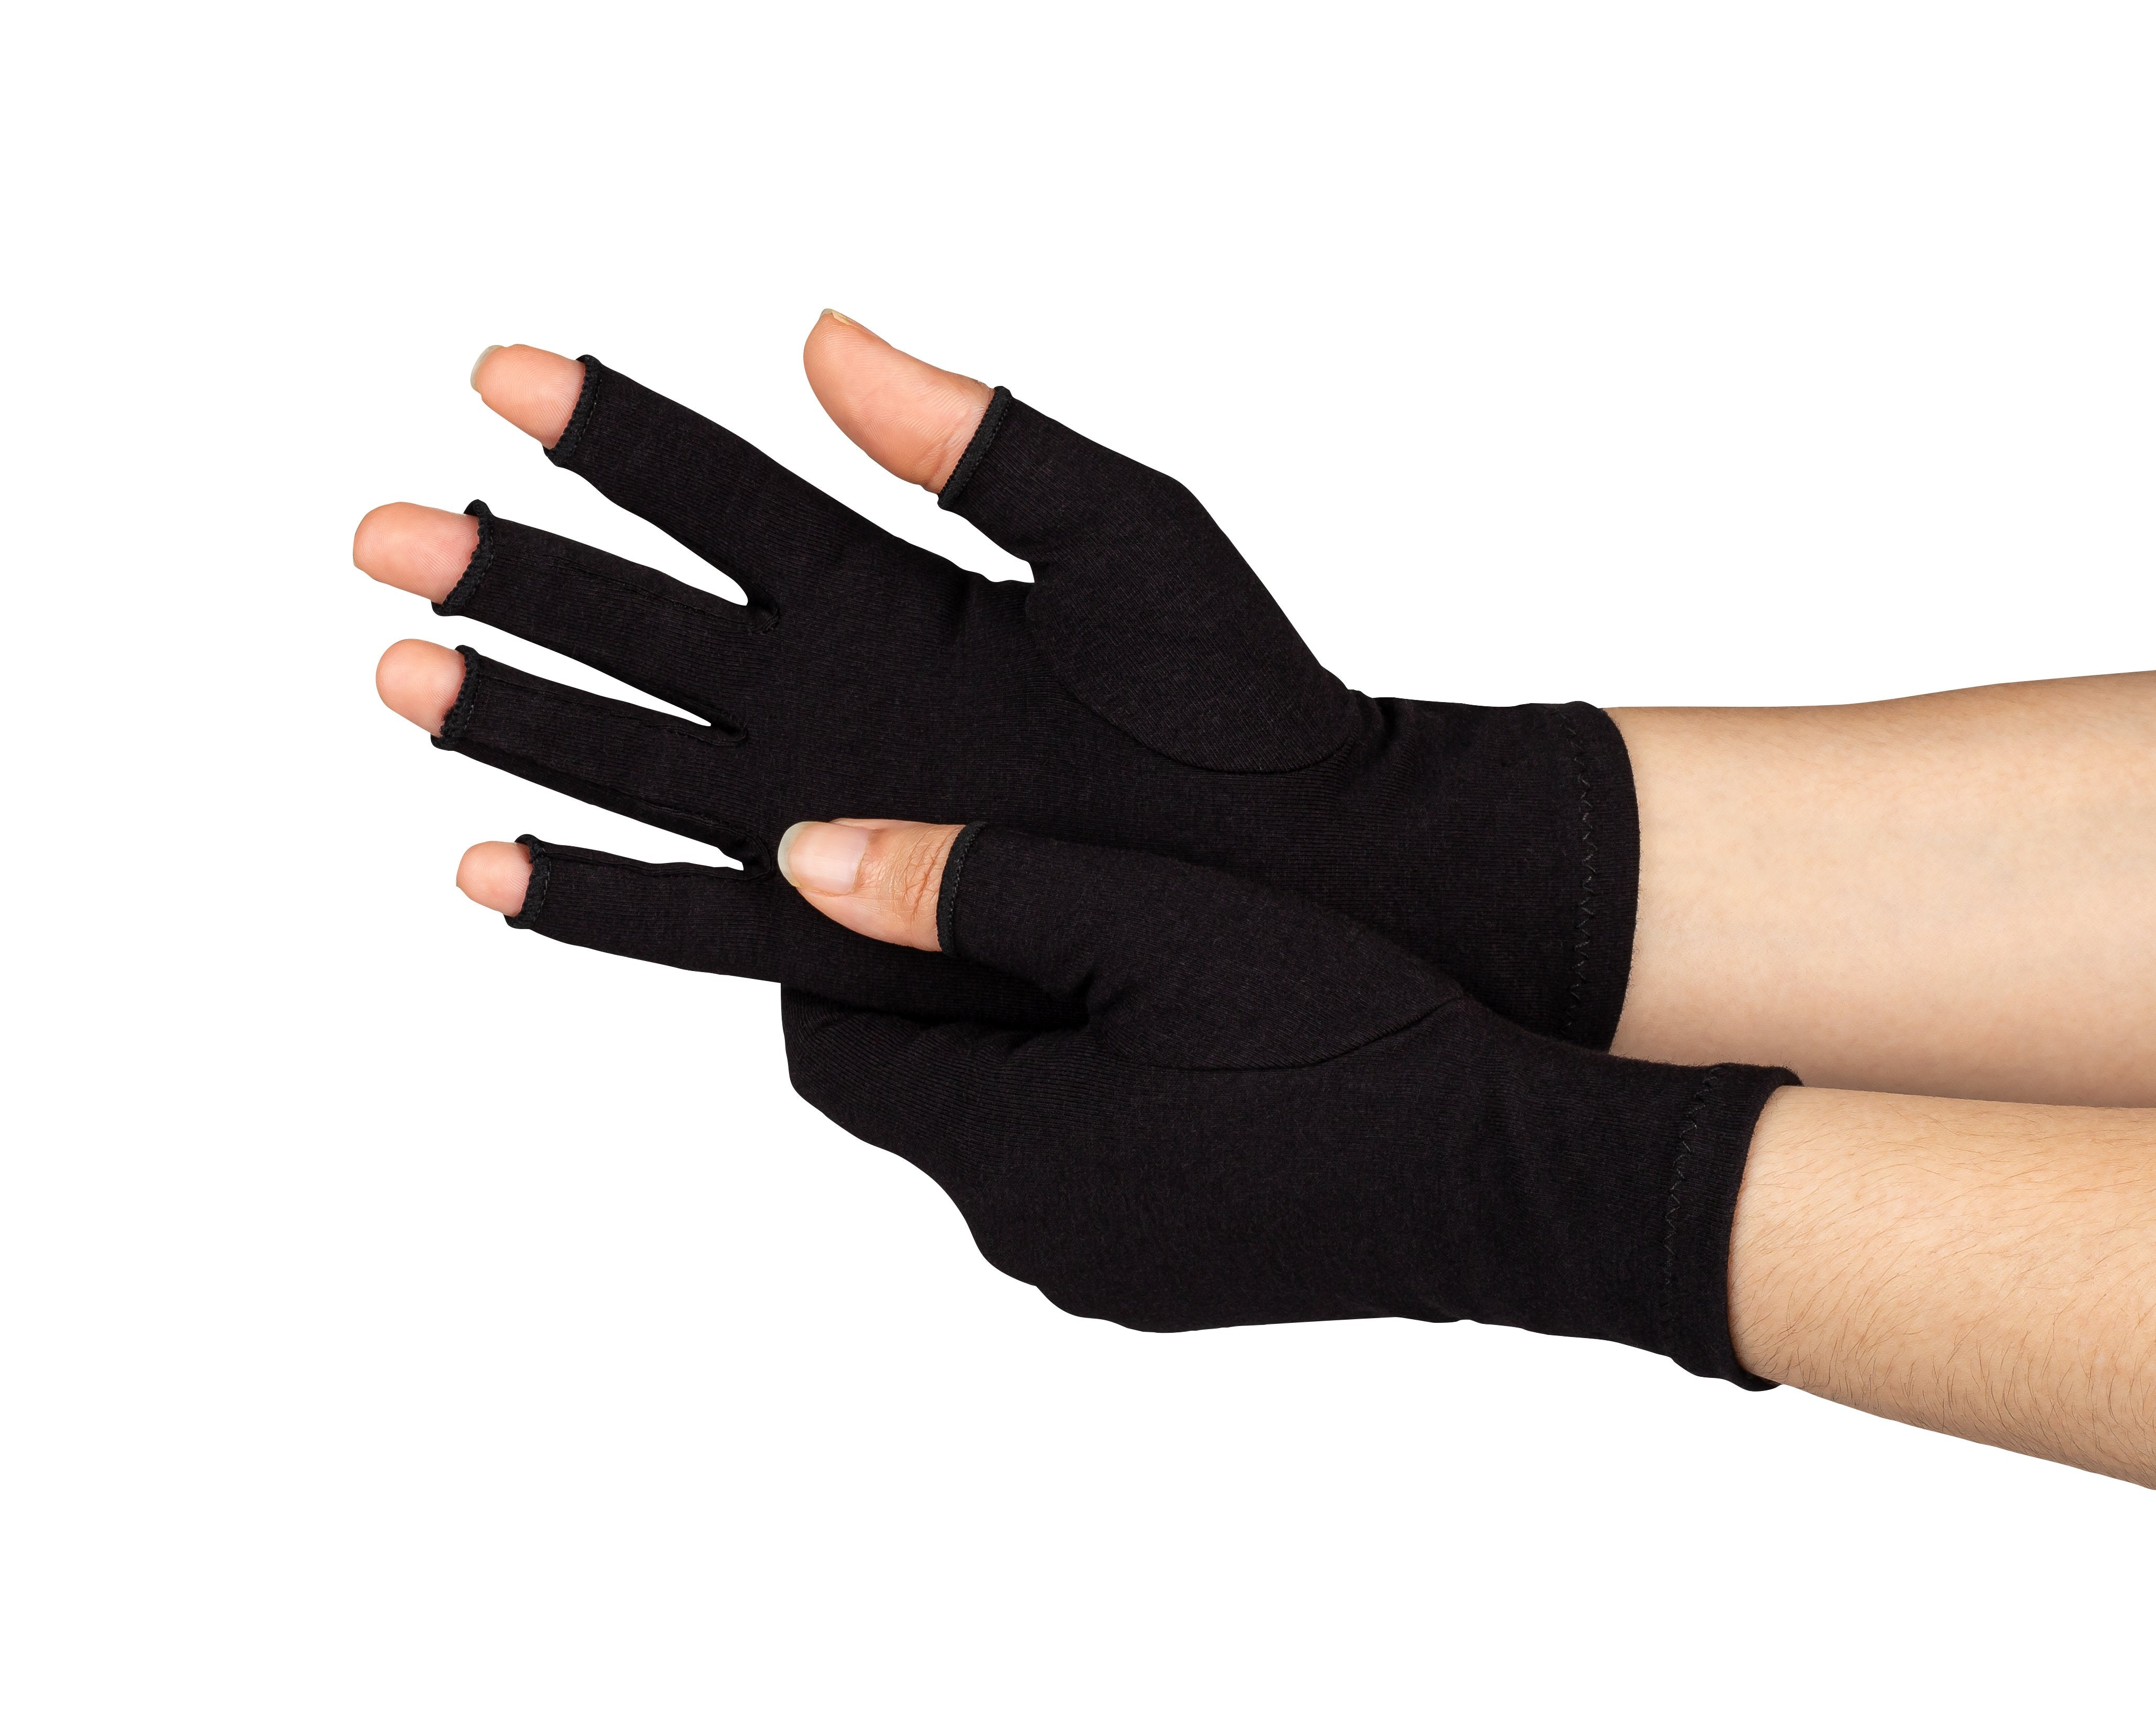 A close-up of hands of a woman with arthritis, wearing Classic Black Compression Gloves with open fingers, her palm turned up to the camera on a white background.